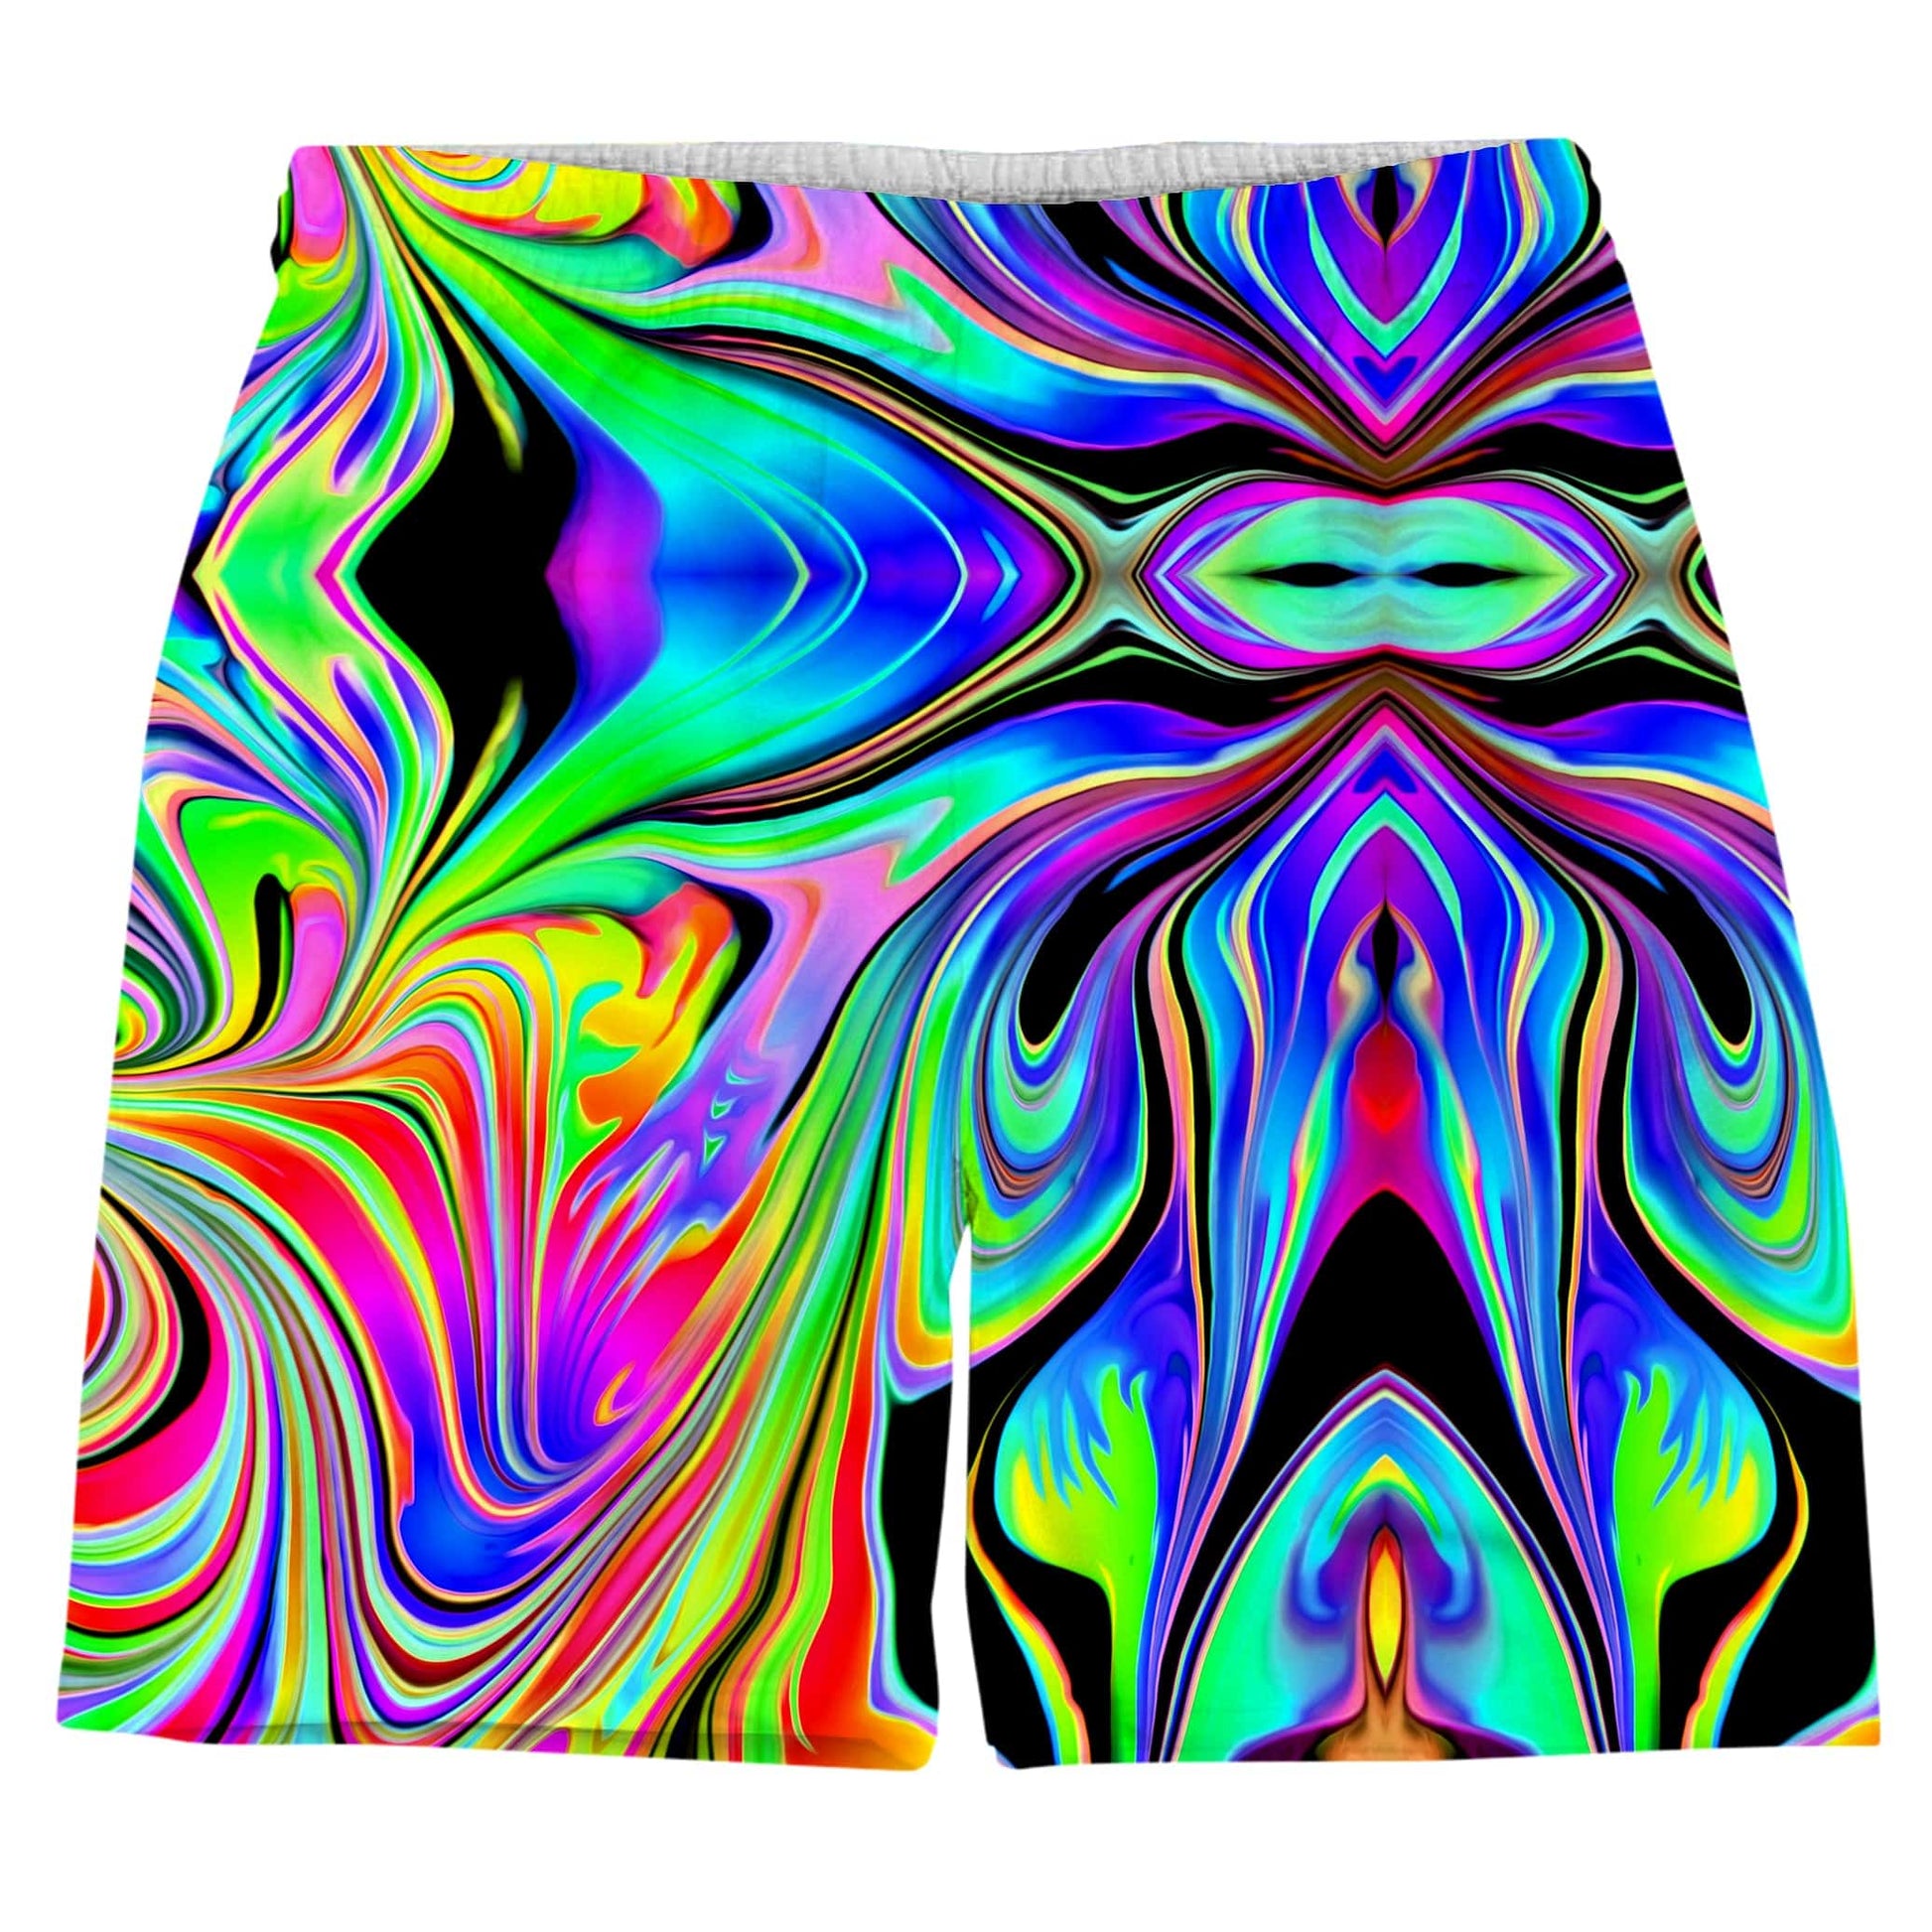 Macro Dose T-Shirt and Shorts Combo, Psychedelic Pourhouse, | iEDM